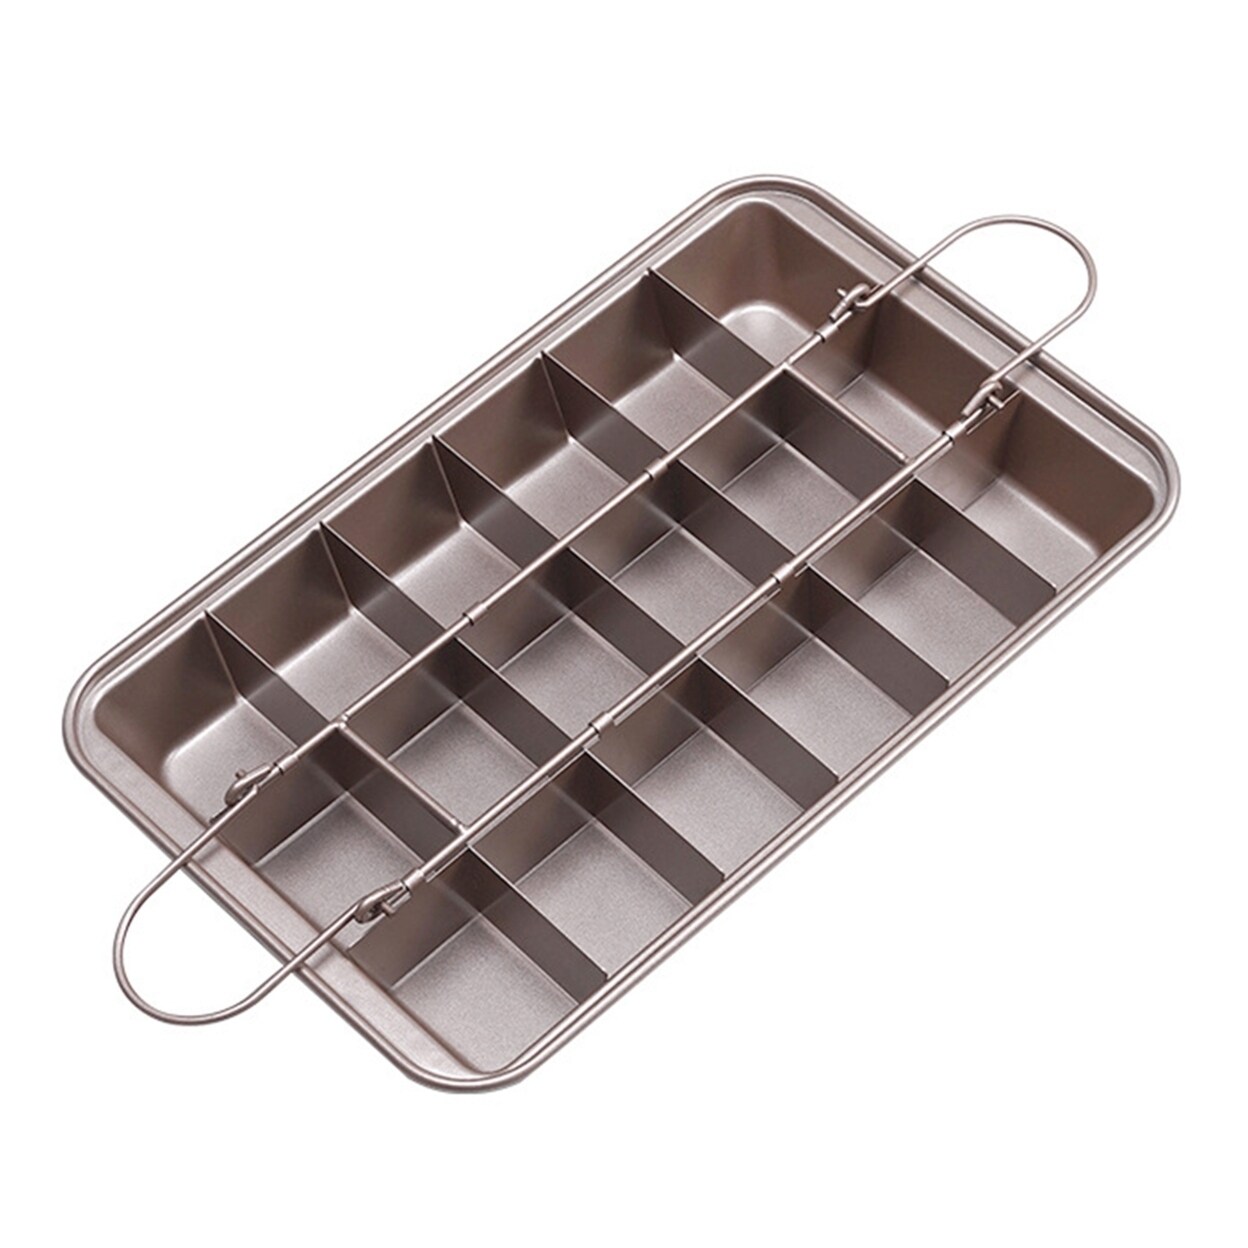 https://ak1.ostkcdn.com/images/products/is/images/direct/0d08349be6887f39bc22f3ba204d1031f4ef62e7/18-Grids-BuiltIn-Slicer-Baking-Pan-High-Carbon-Steel-High-Temperature-Resistance-Brownie-Cake-Pan-Kitchen-Tools.jpg